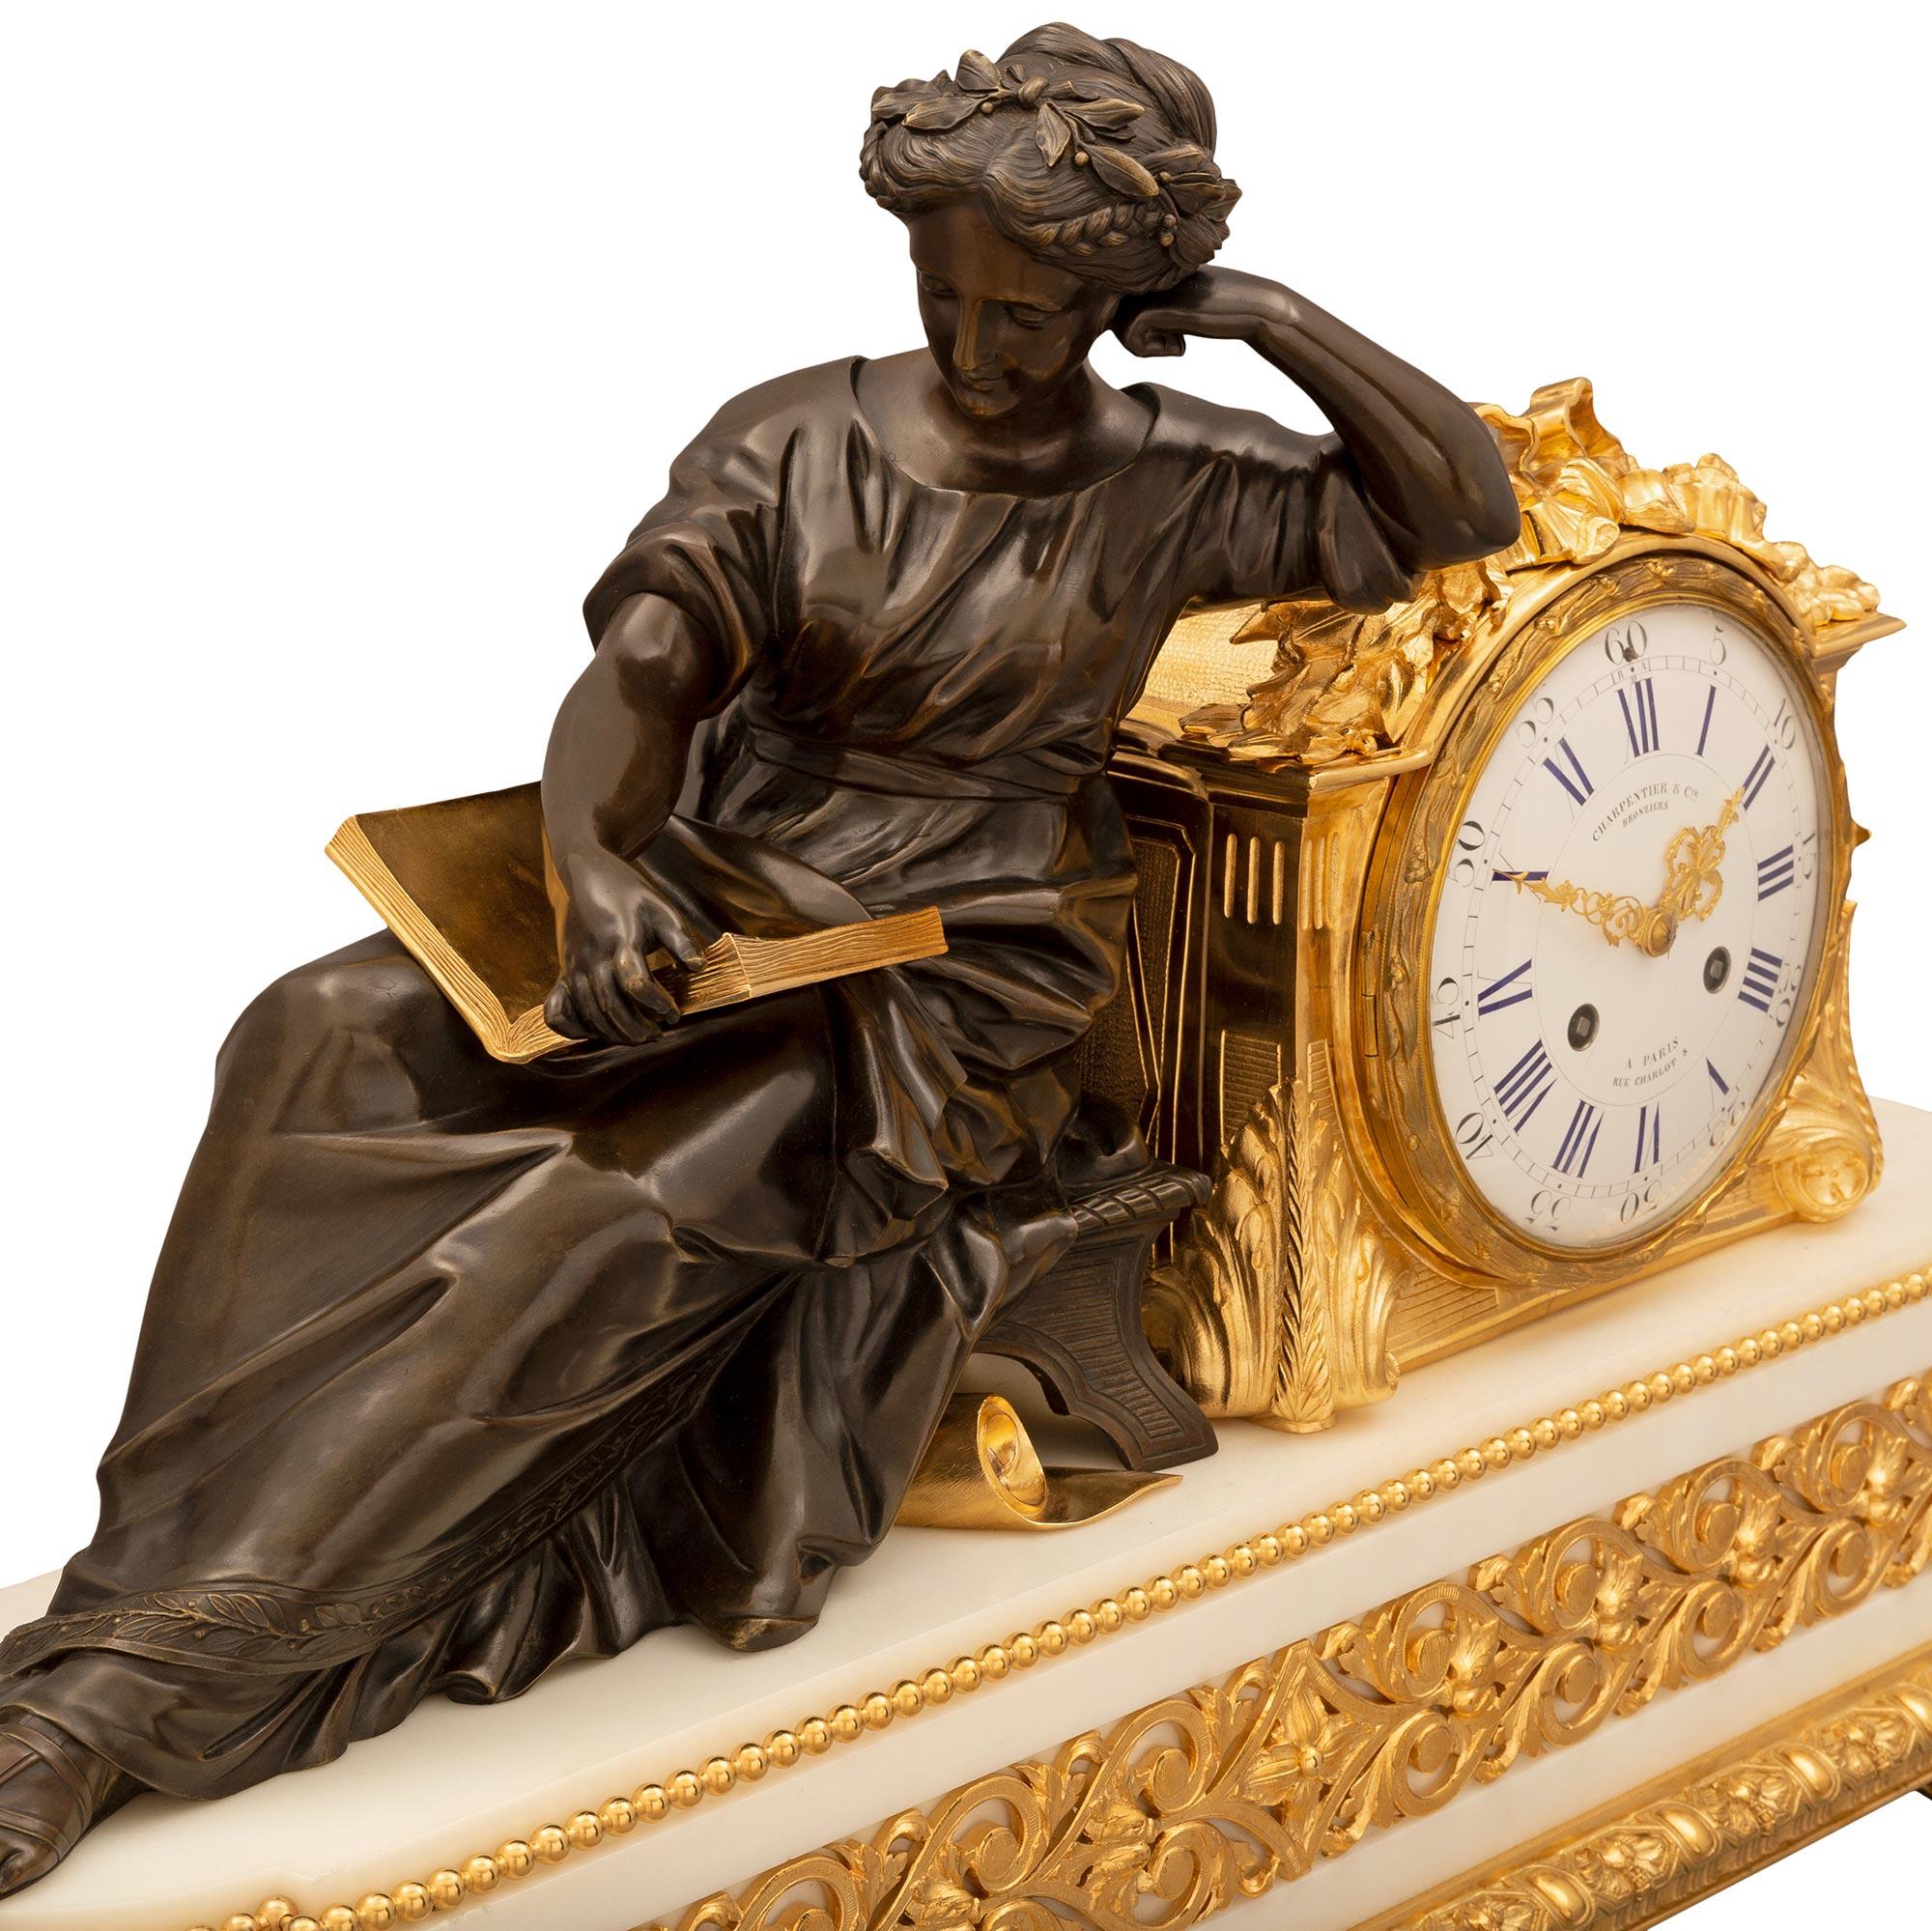 A stunning and extremely high quality French 19th century Louis XVI st. Belle Époque period ormolu, patinated bronze and white Carrara marble clock by Charpentier & Cie. The clock is raised by six elegant topie shaped feet below a lovely and most